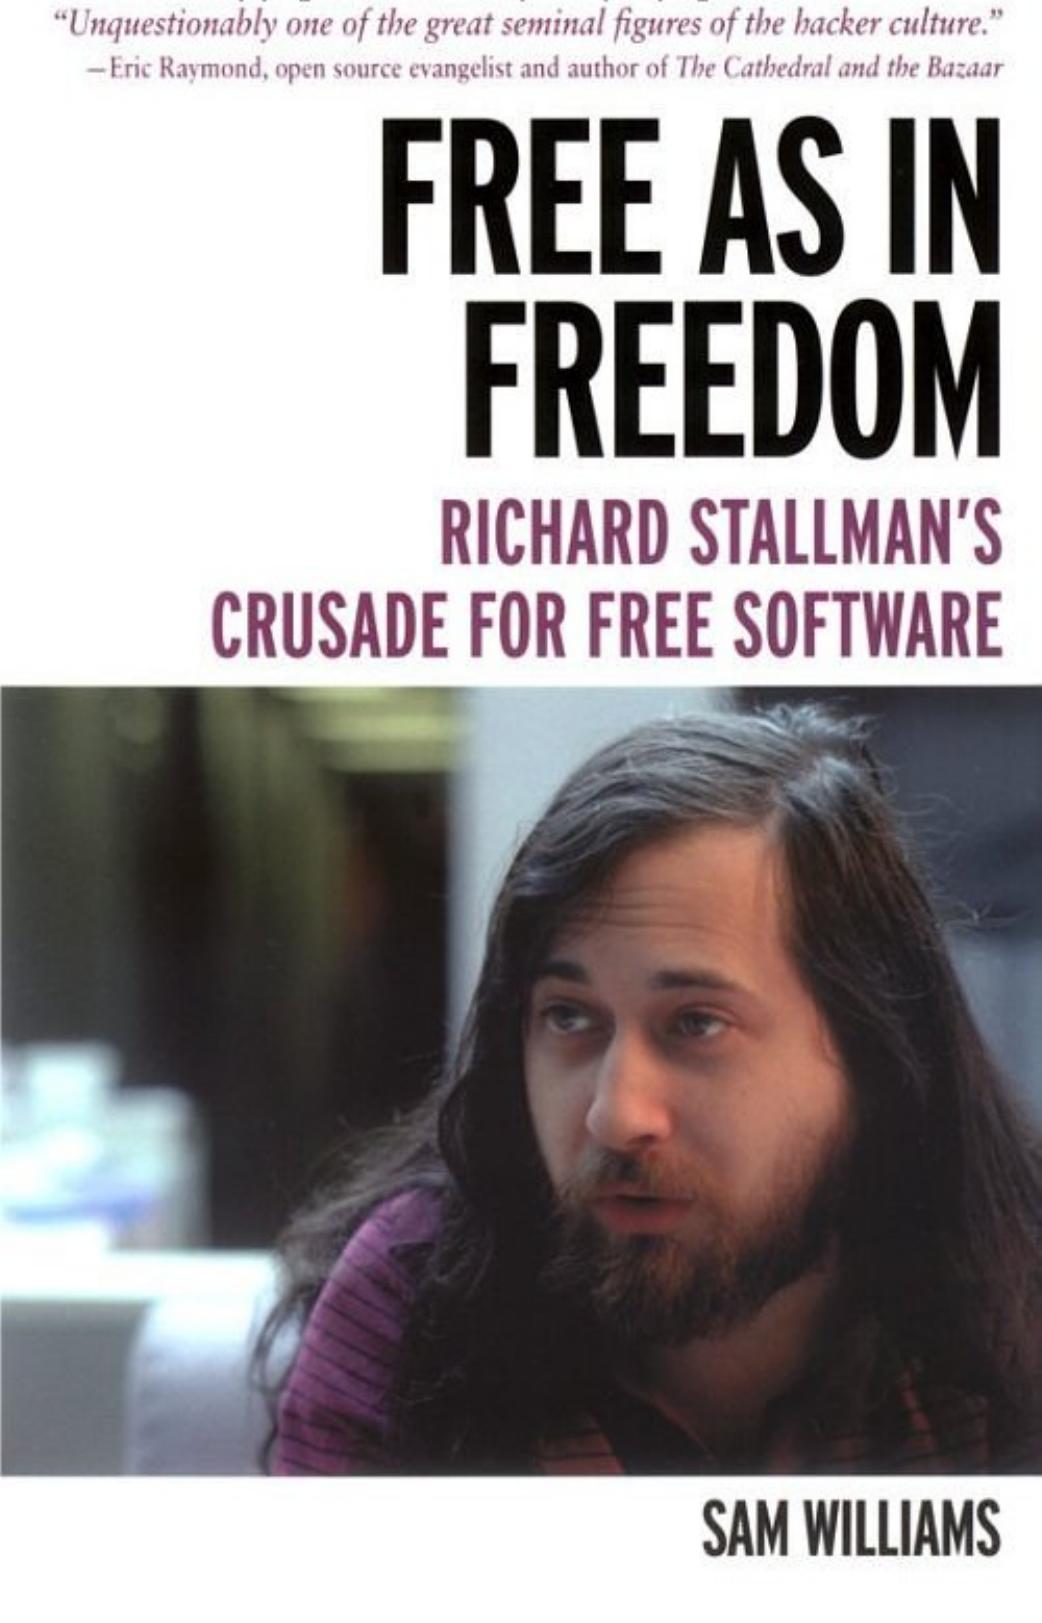 Free as in Freedom: Richard Stallman's Crusade for Free Software by Sam Williams